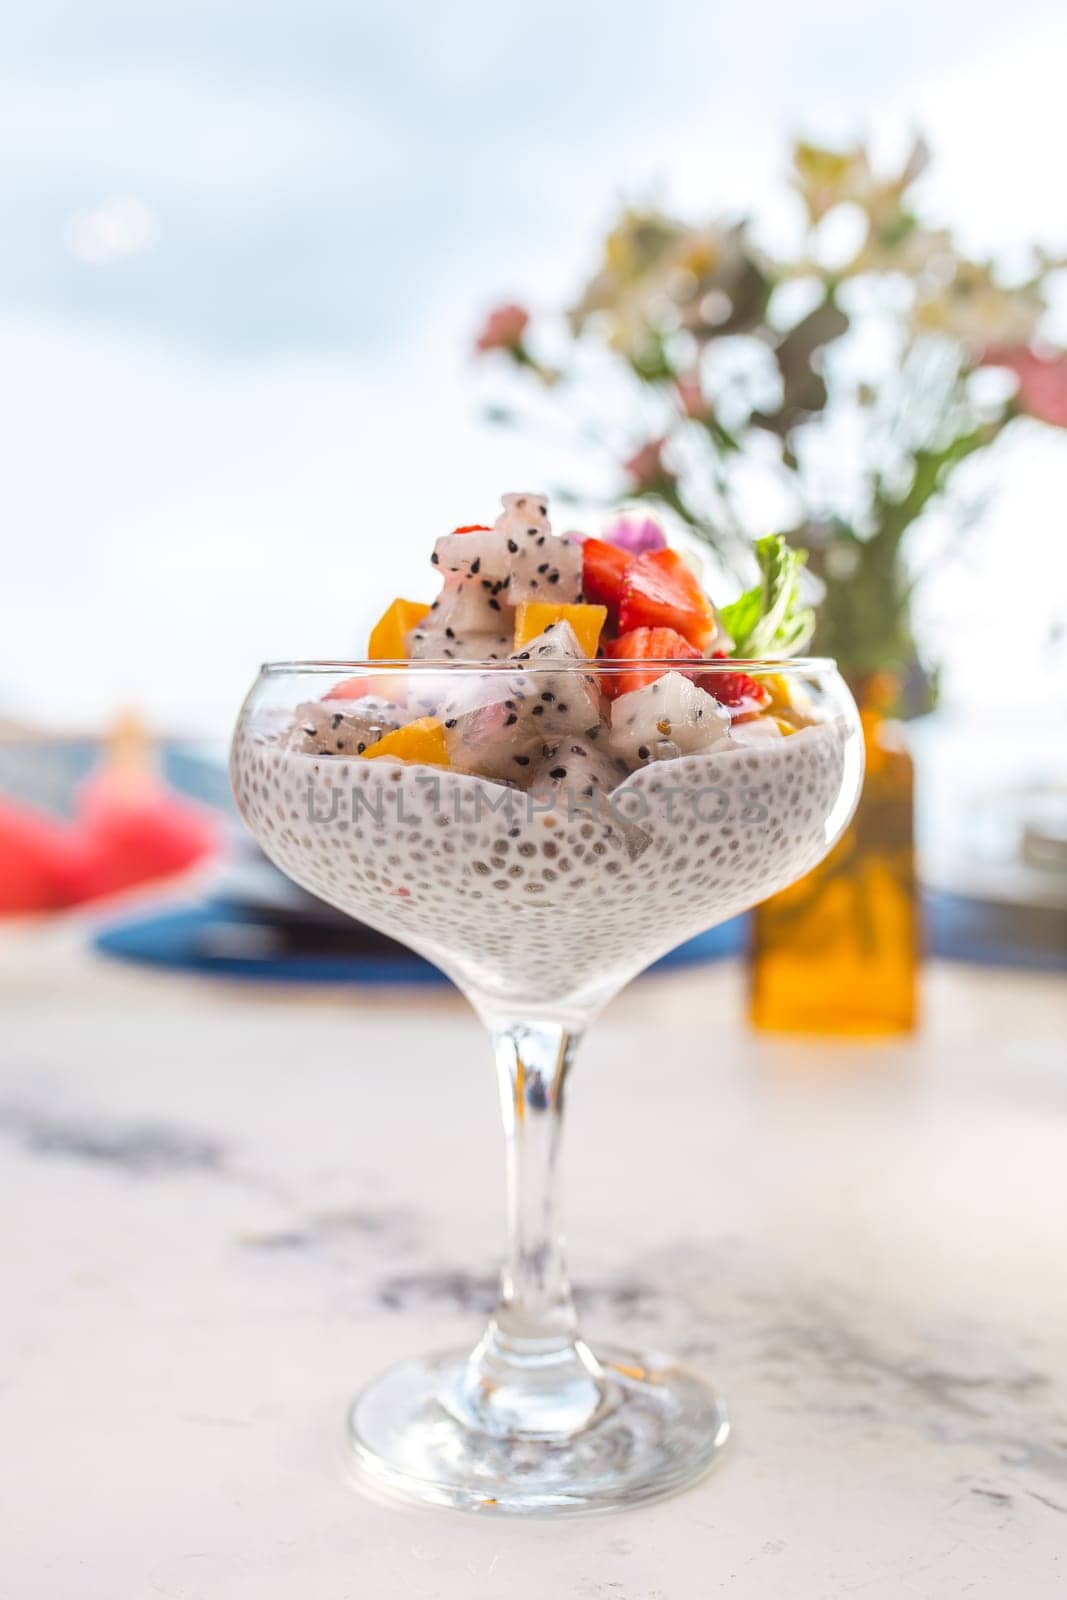 Chia seed pudding with fresh fruit in glass on white table with blurred background. Healthy eating, dieting, or detox concept.